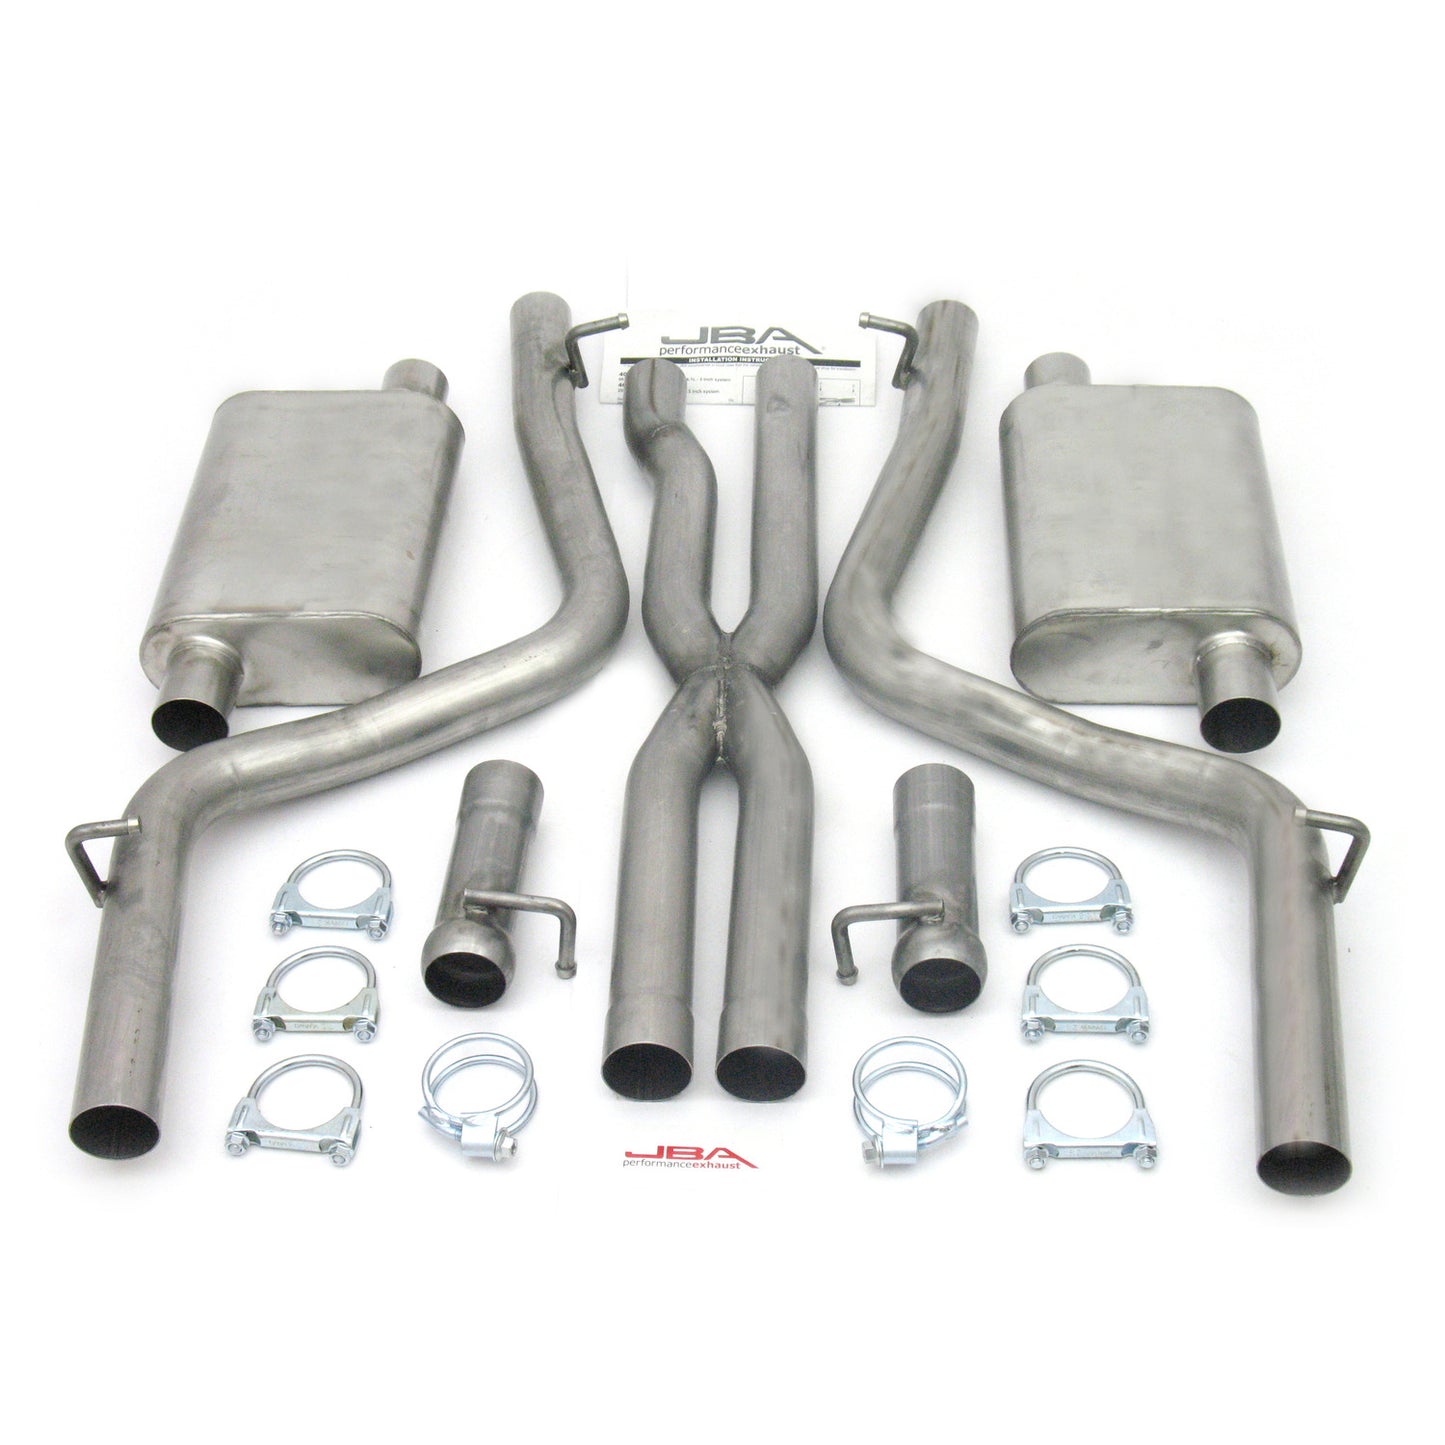 JBA Performance Exhaust 40-1666 2.5" Stainless Steel Exhaust System 08-14 Dodge Challenger Dual Exhaust 5.7L